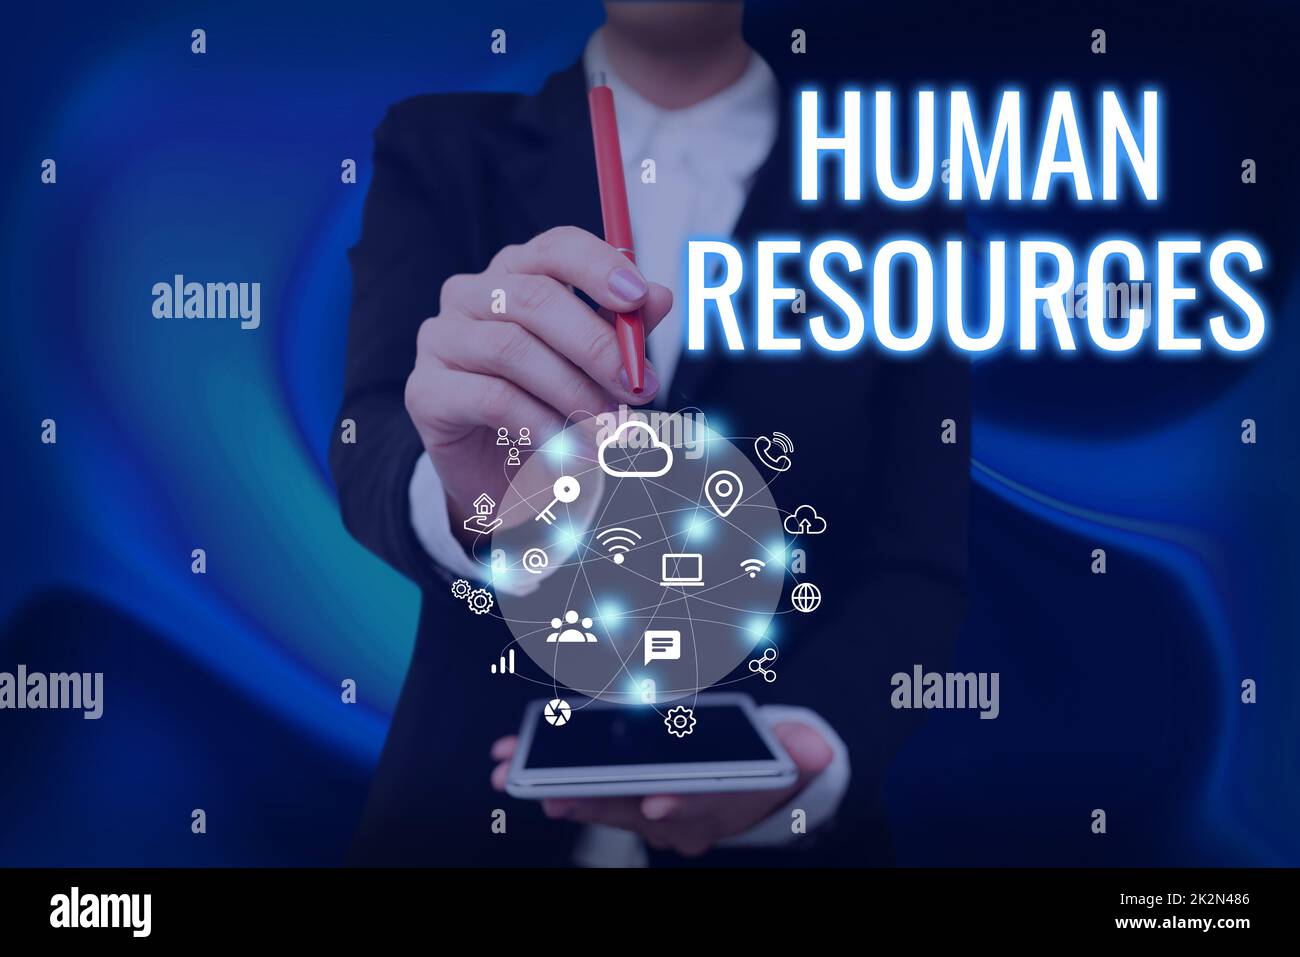 Writing displaying text Human Resources. Business overview The showing who make up the workforce of an organization Lady Pressing Screen Of Mobile Phone Showing The Futuristic Technology Stock Photo